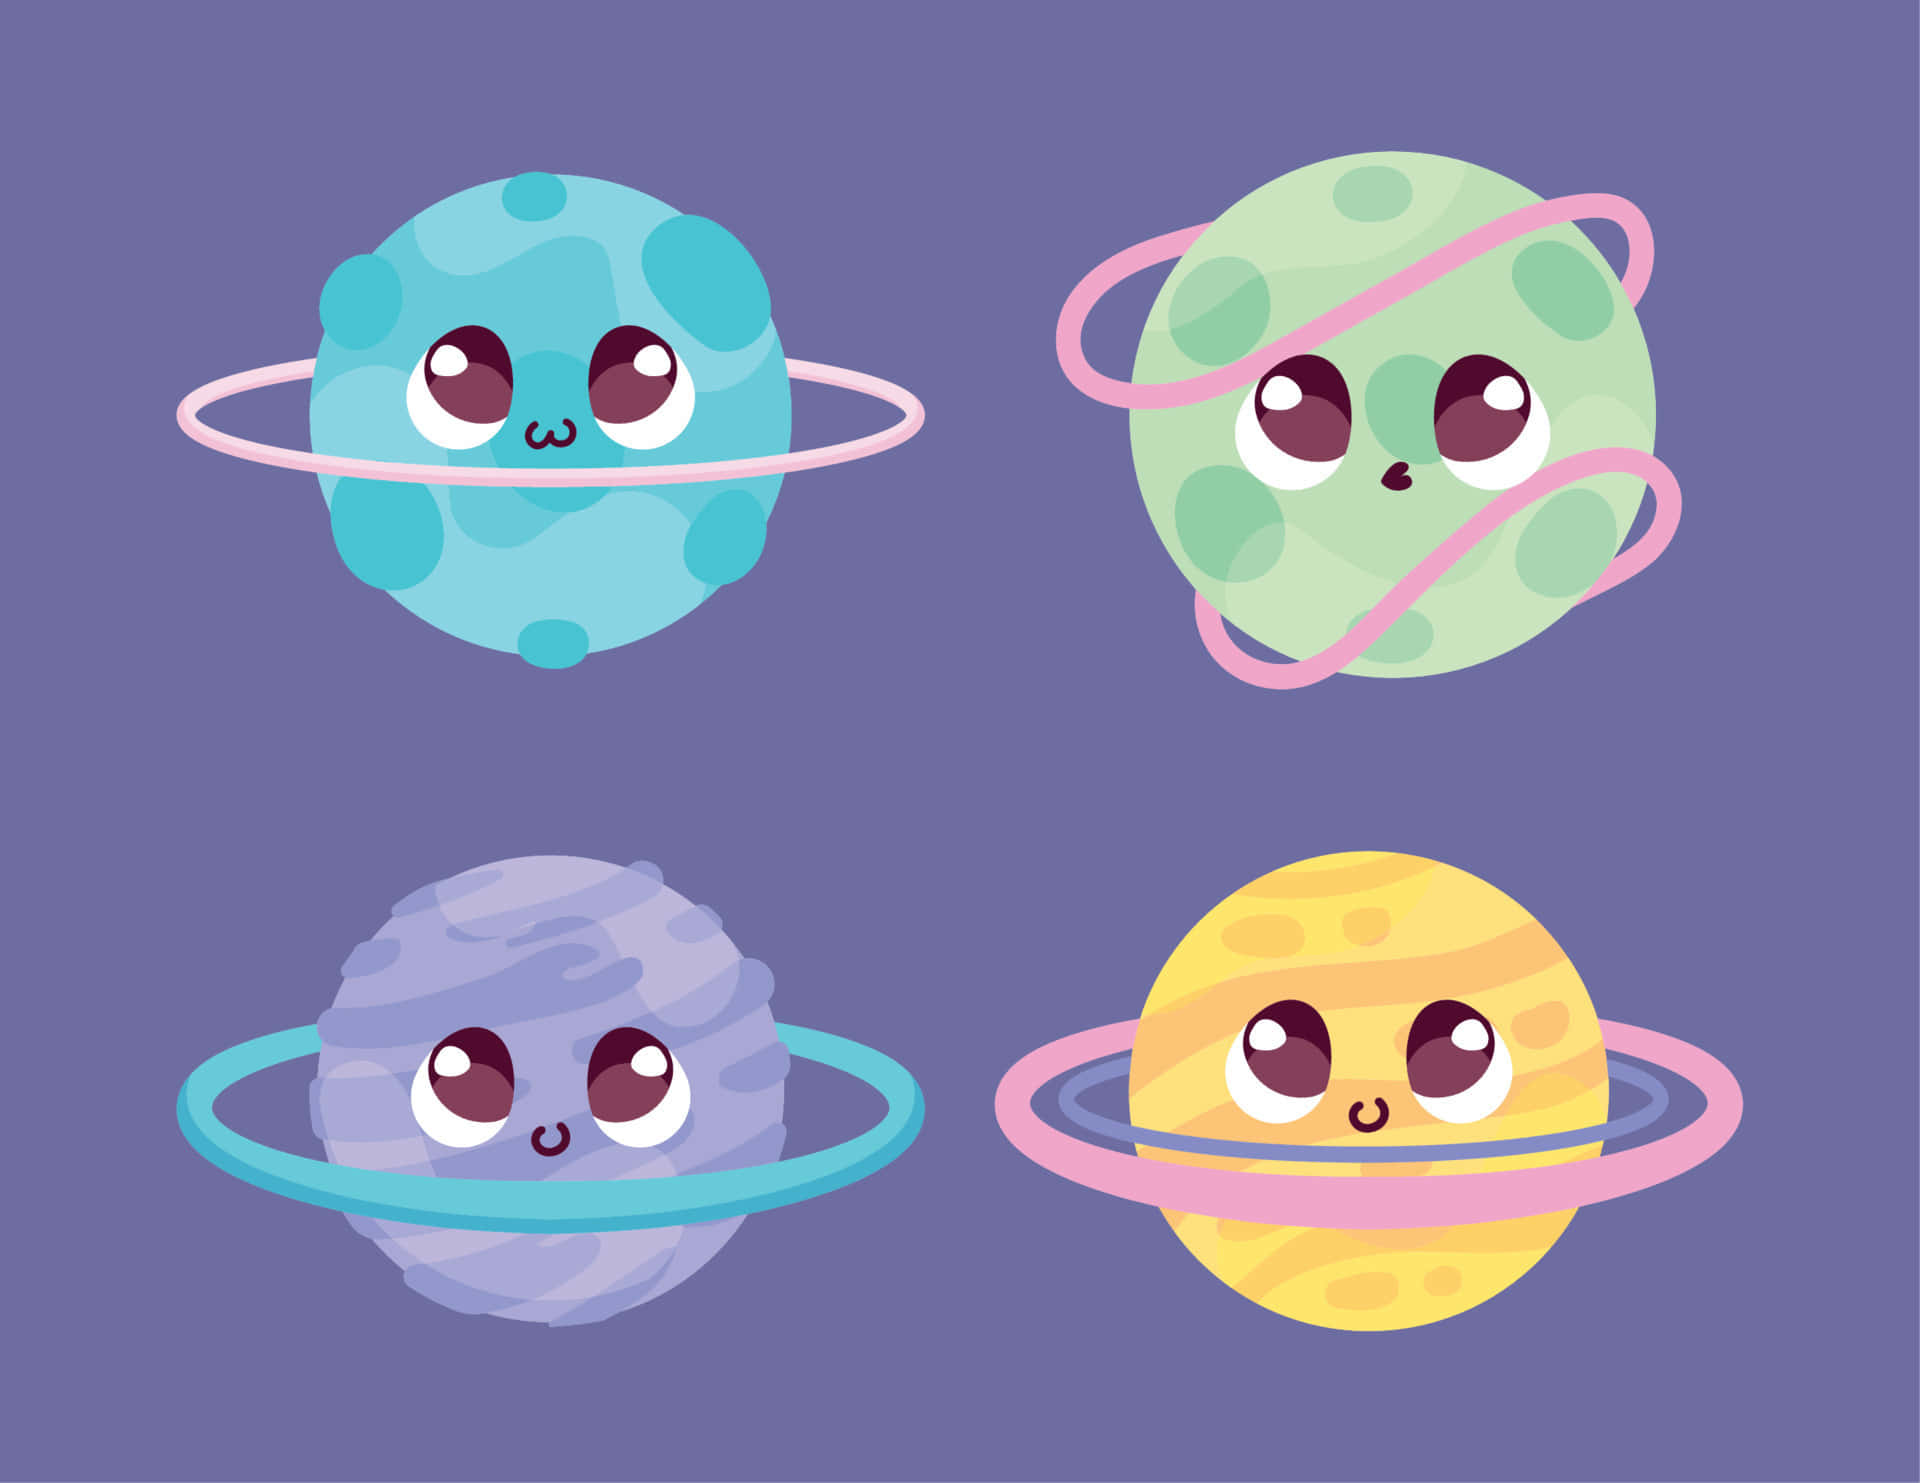 Caption: Adorable Kawaii Space Scene with Planets and Stars Wallpaper